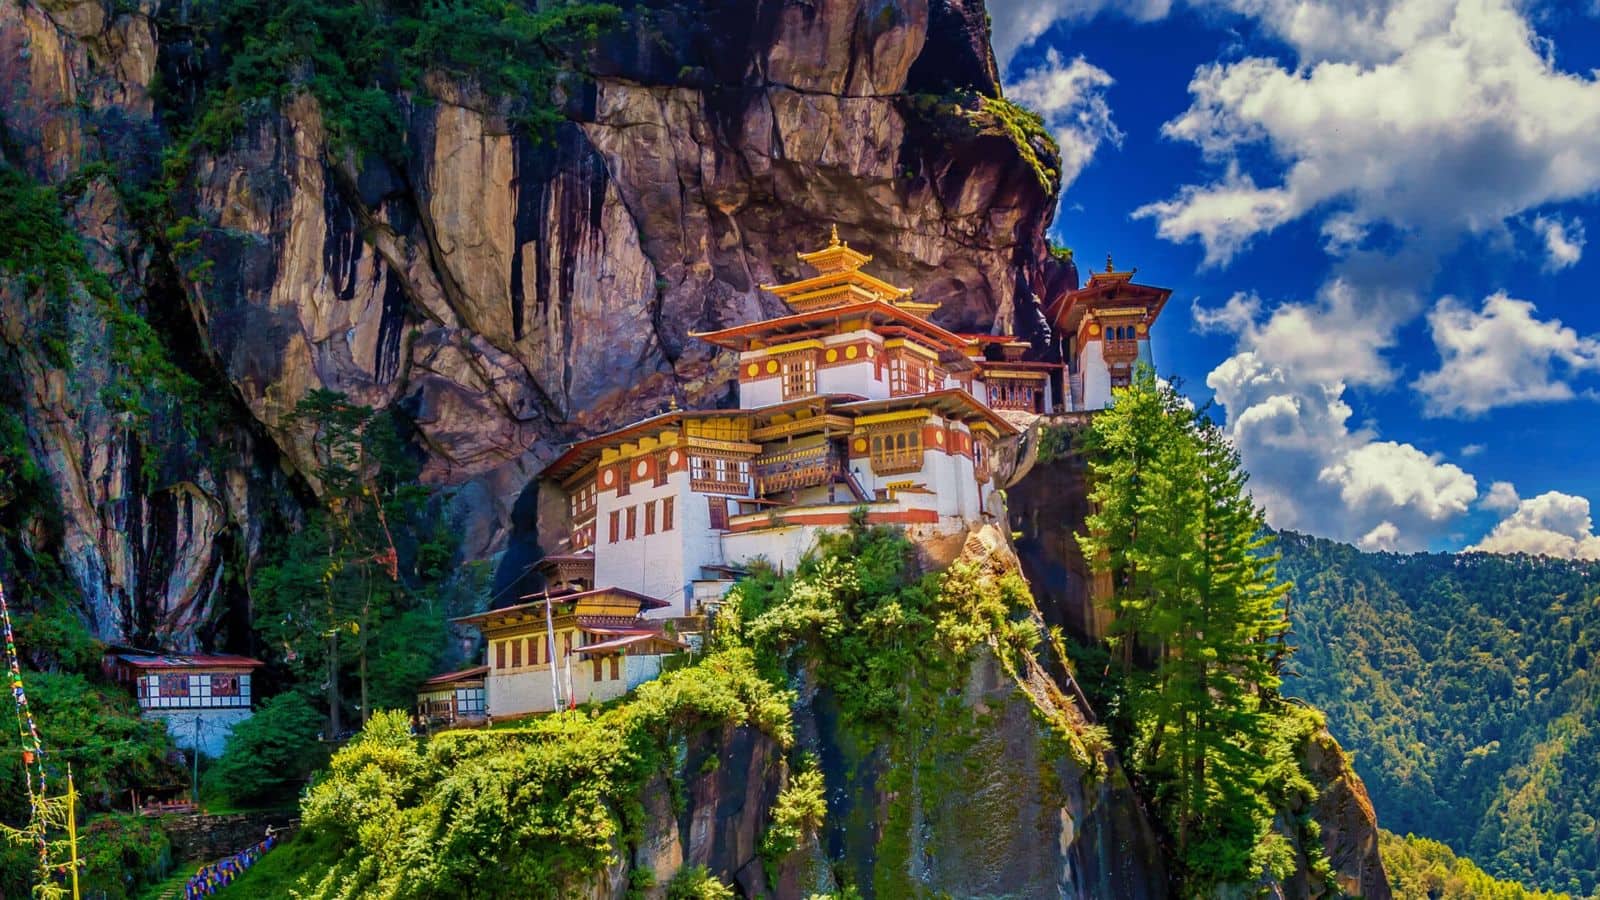 Explore Bhutan's ancient dzongs with this travel guide